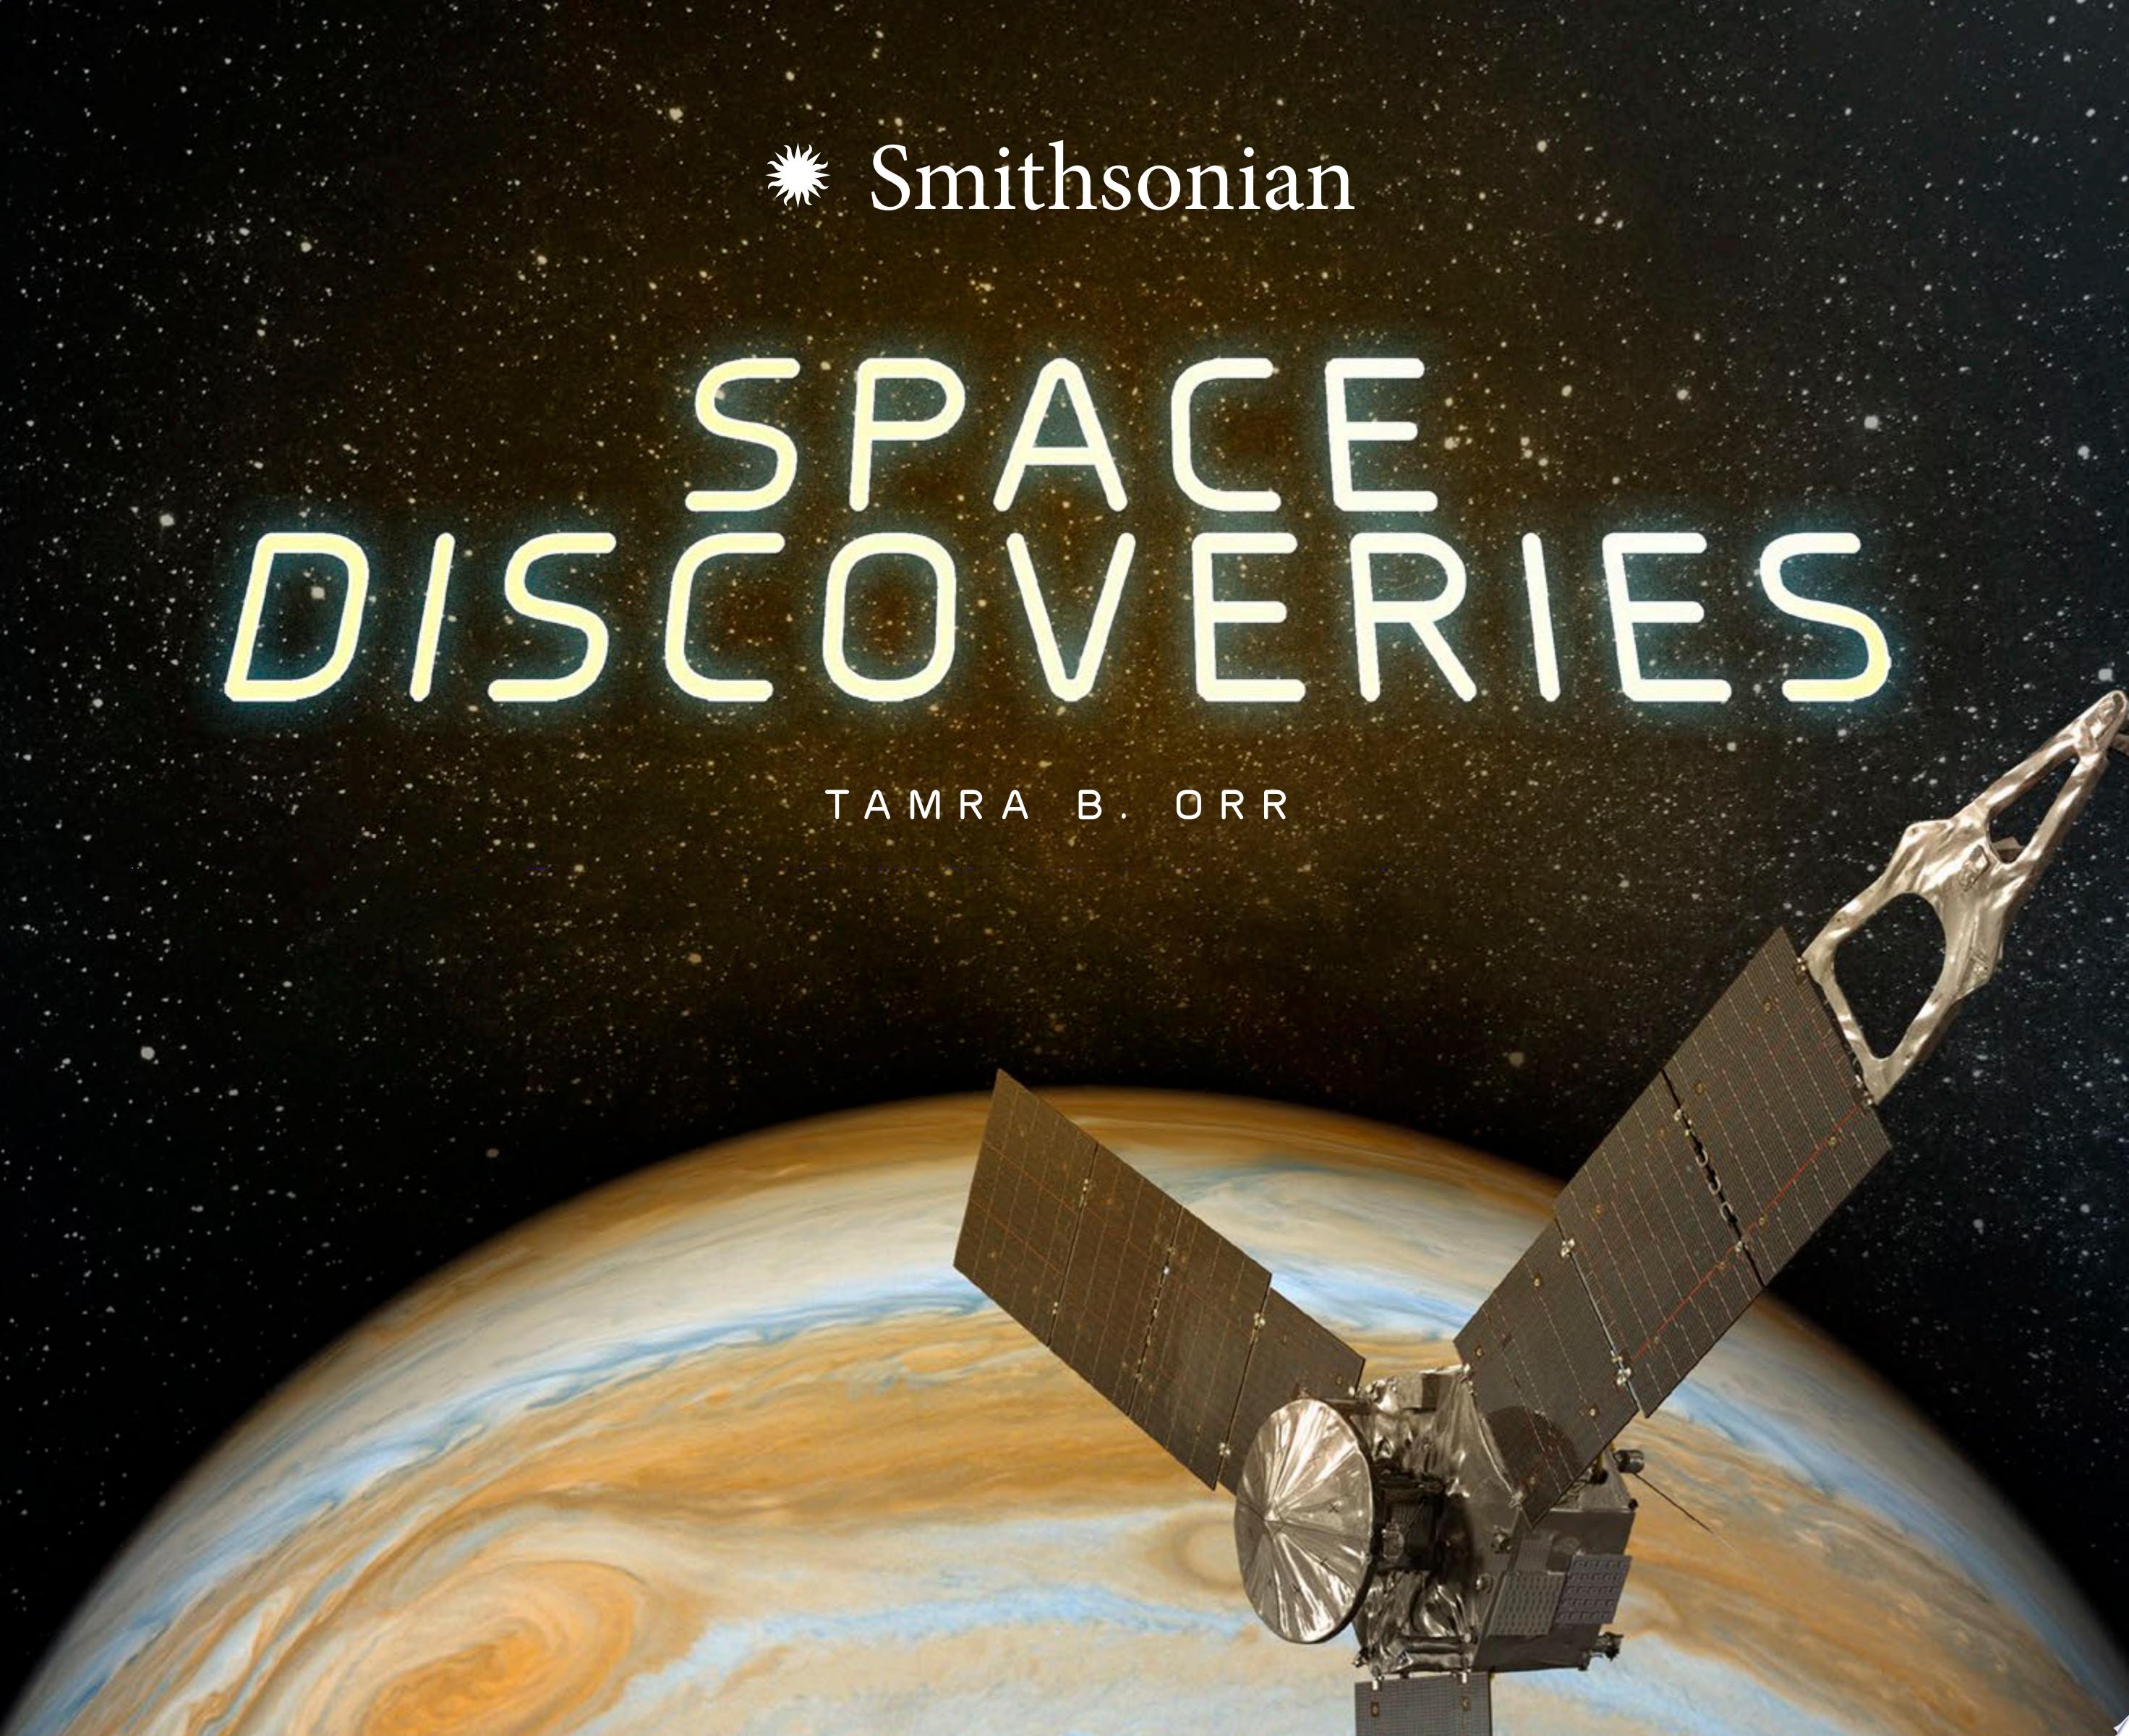 Image for "Space Discoveries"